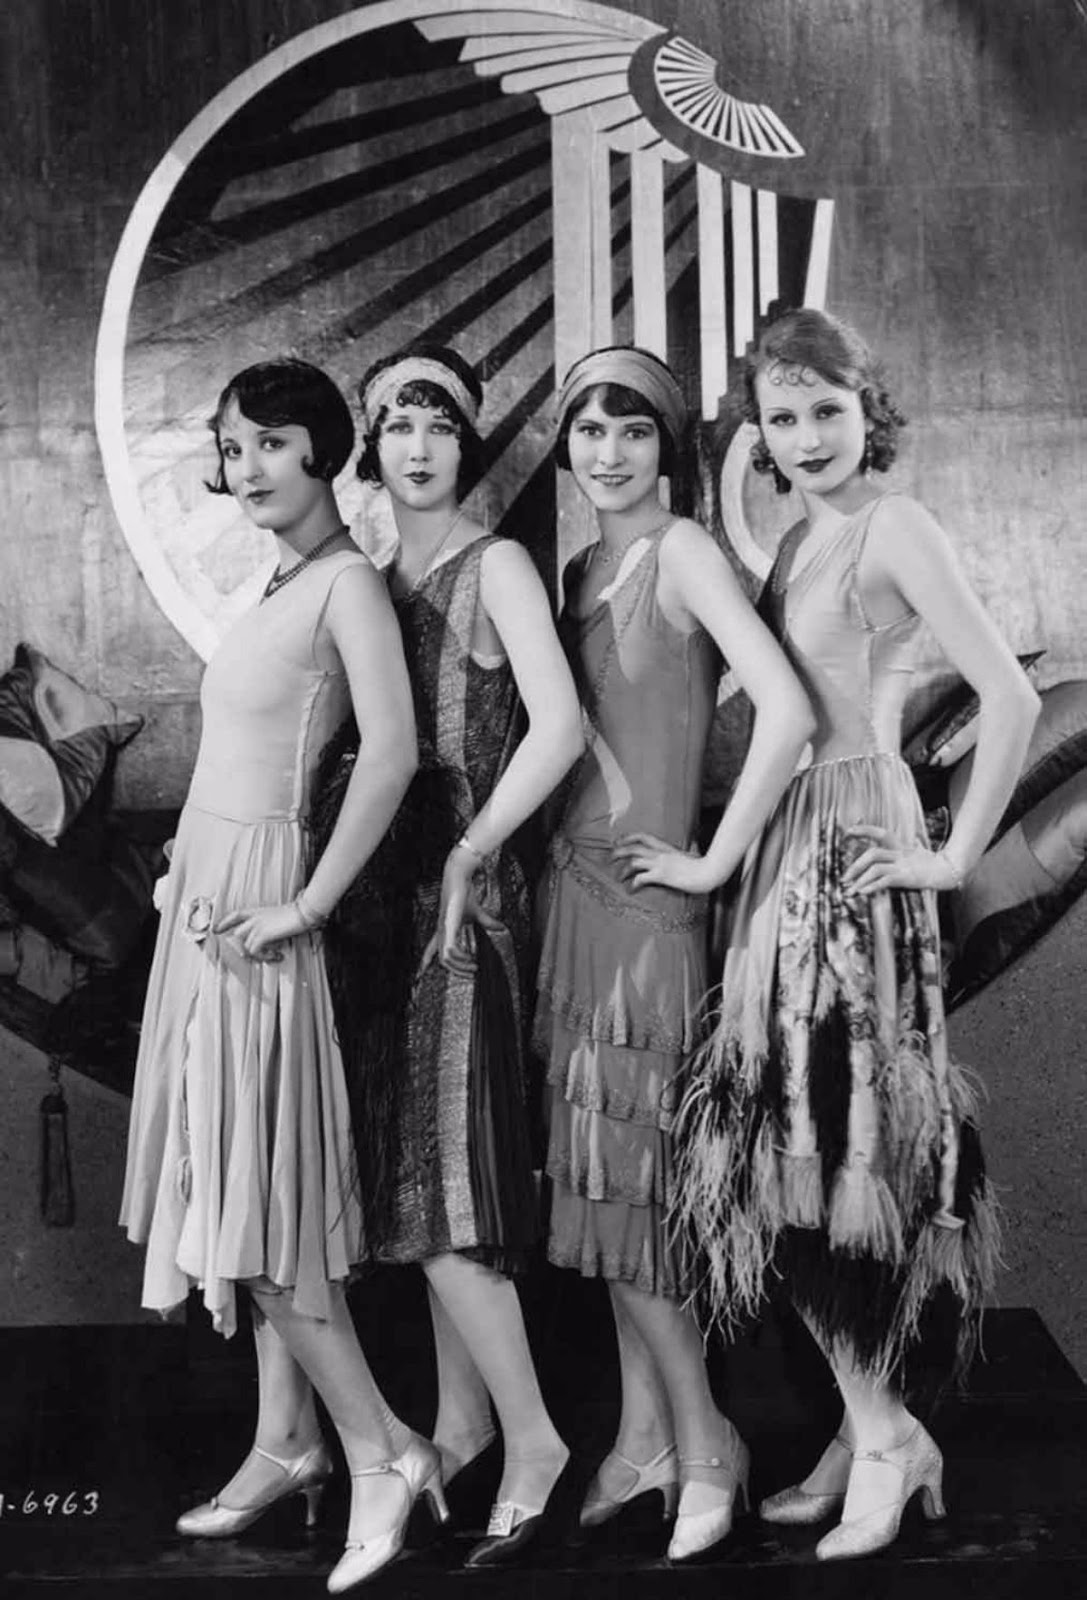 Style in the Jazz Age: 20 Vintage Photos Show Beautiful Women's